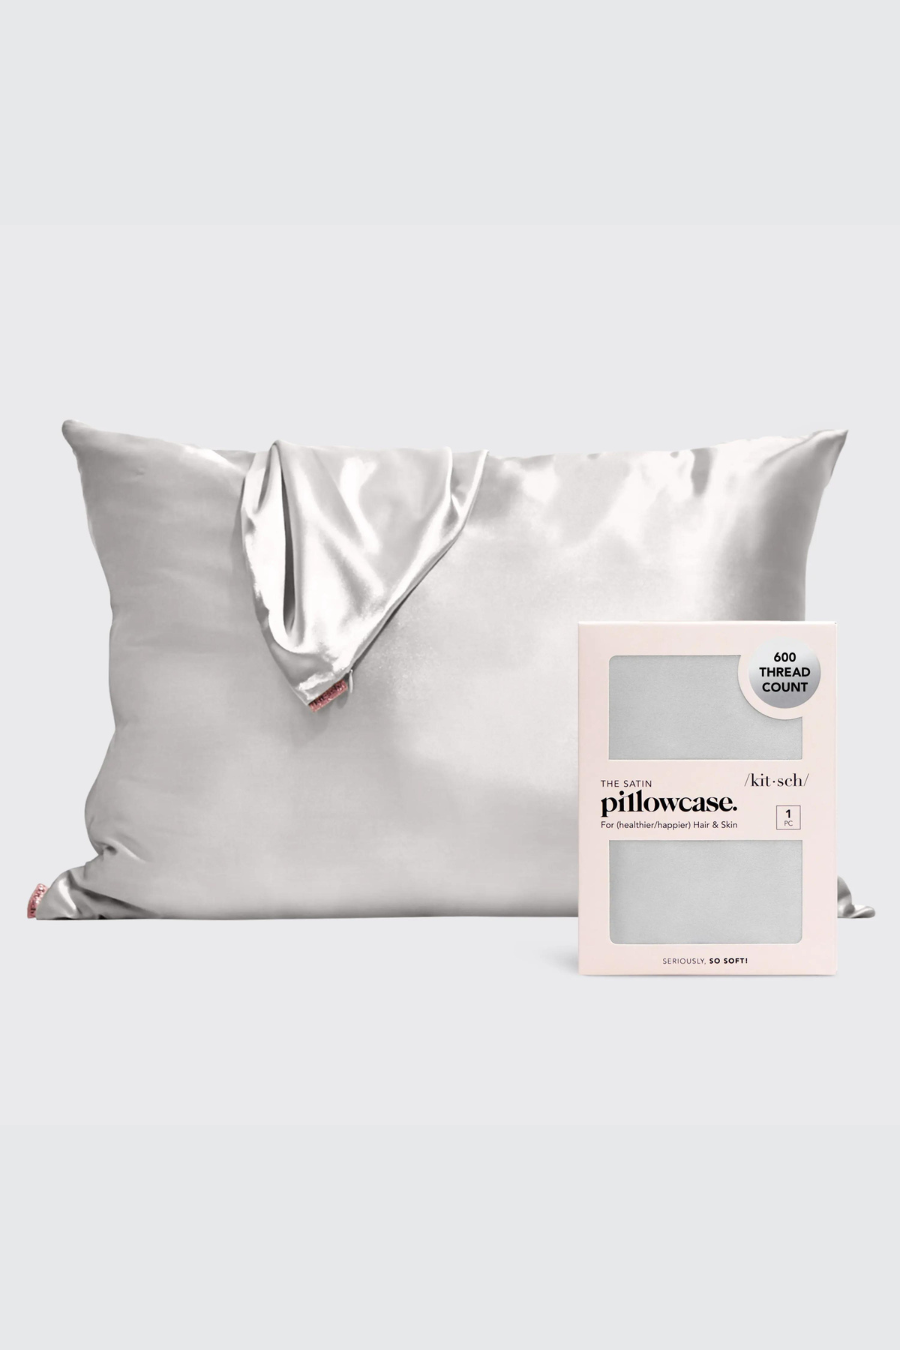 silver satin pillowcase standing upright with a pillowcase draped over it and another pillowcase in front of it in its packaging 